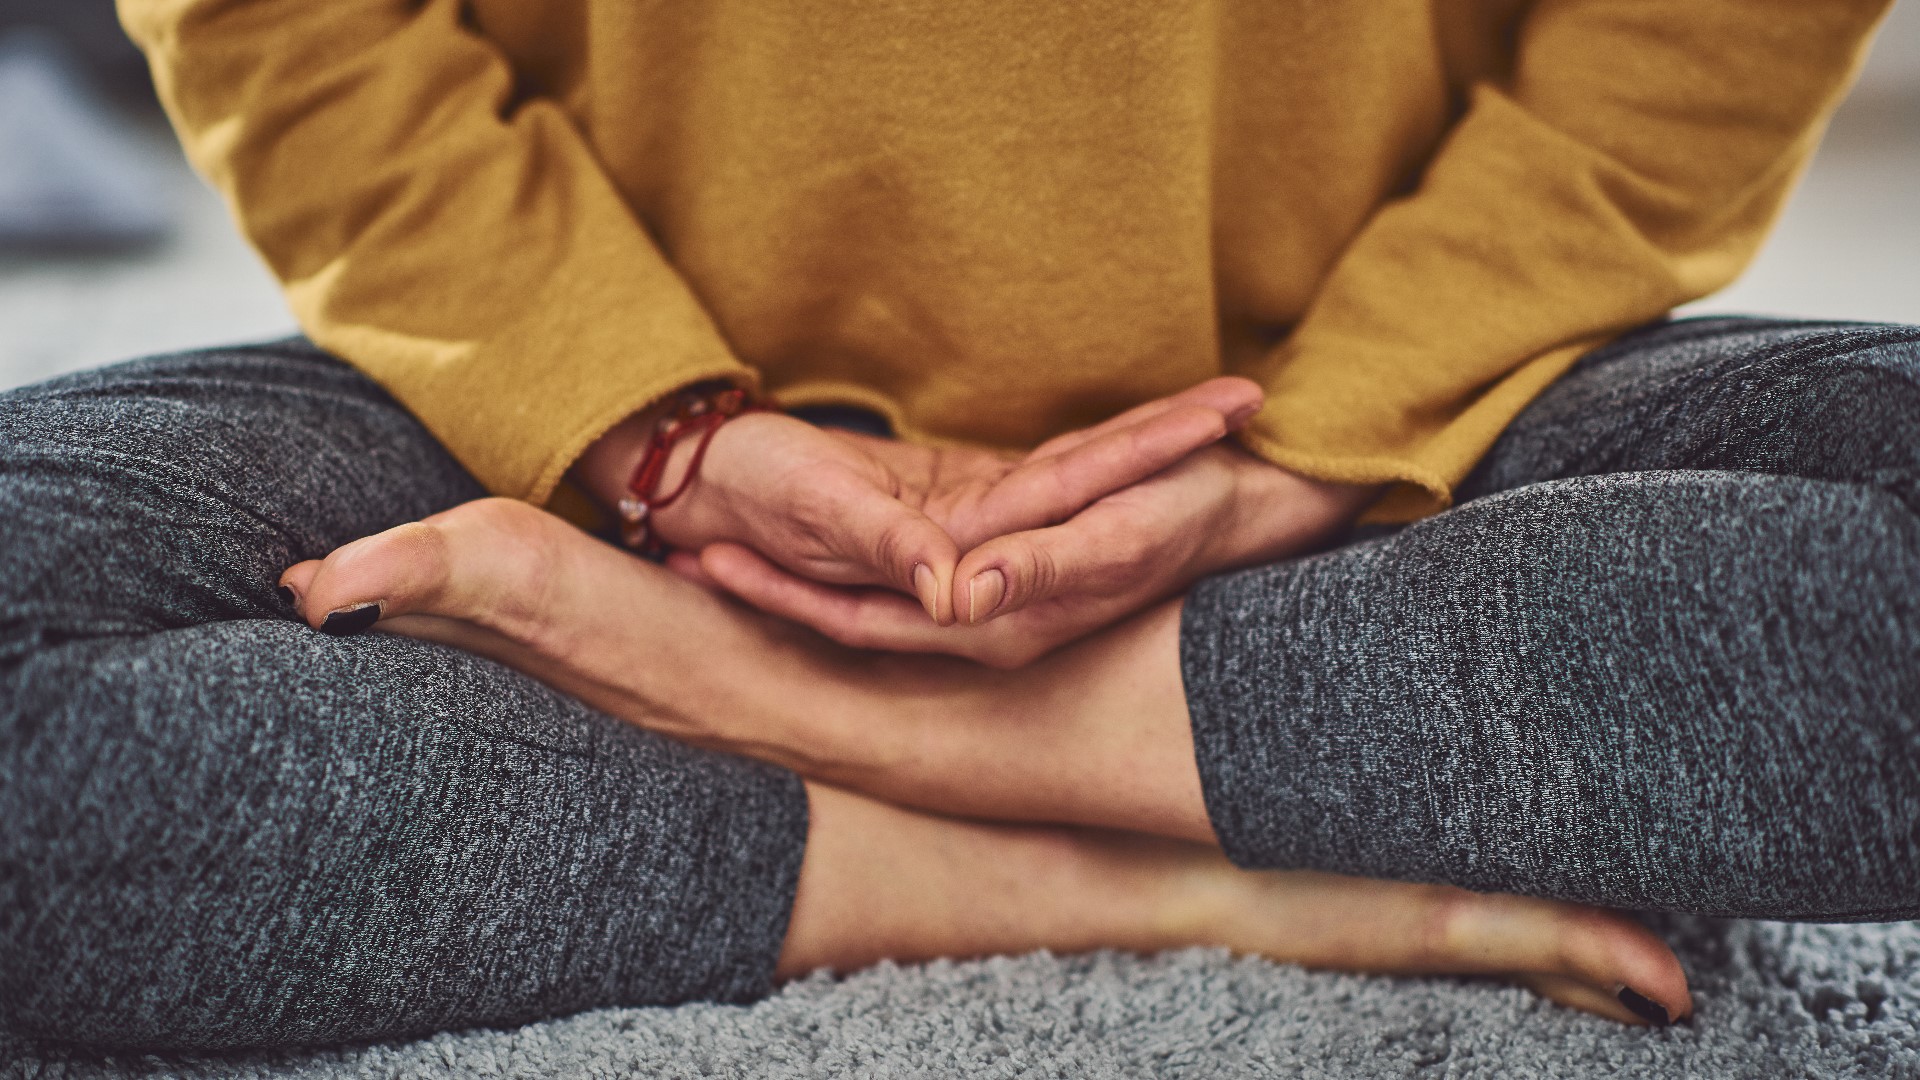 6 News Anchor Leslie Draffin talked with Johann Urb, the creator of Pyramid Breathwork, and his wife Rachel Pringle, about the transformative power of breathing.